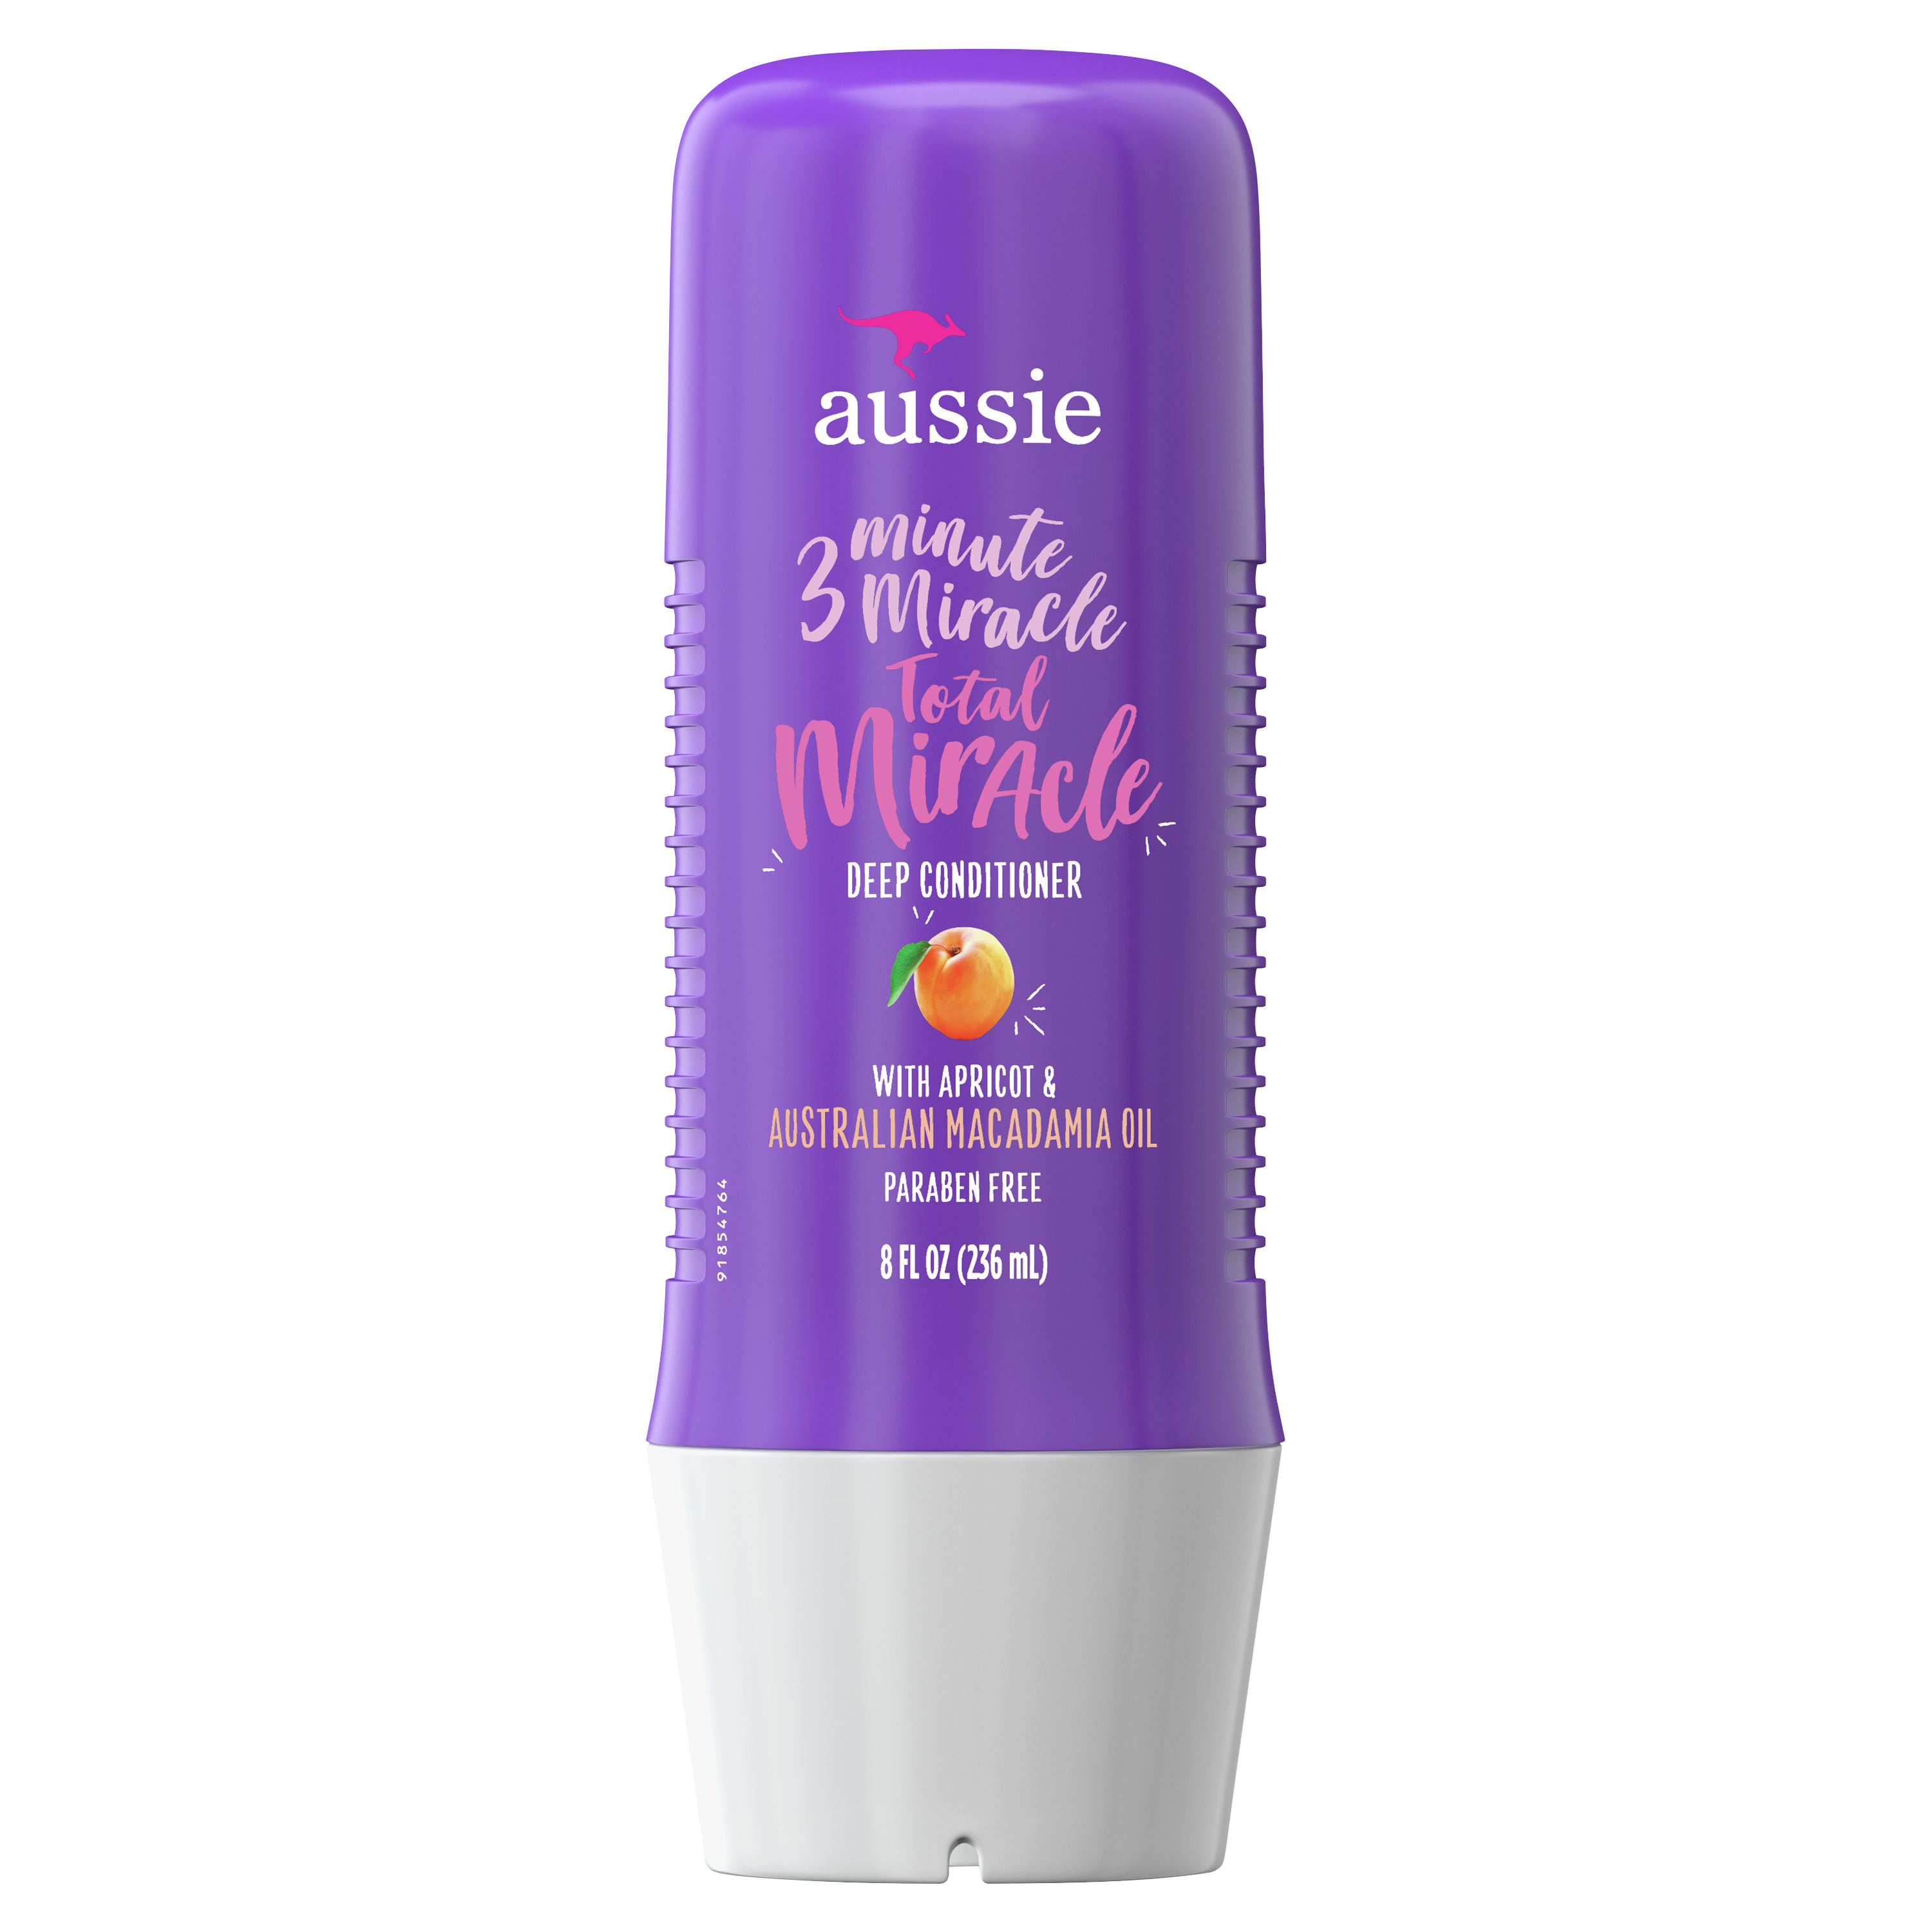 Aussie 3 Minute Total Miracle Deep Conditioner with Apricot, 8 fl oz - image 1 of 8